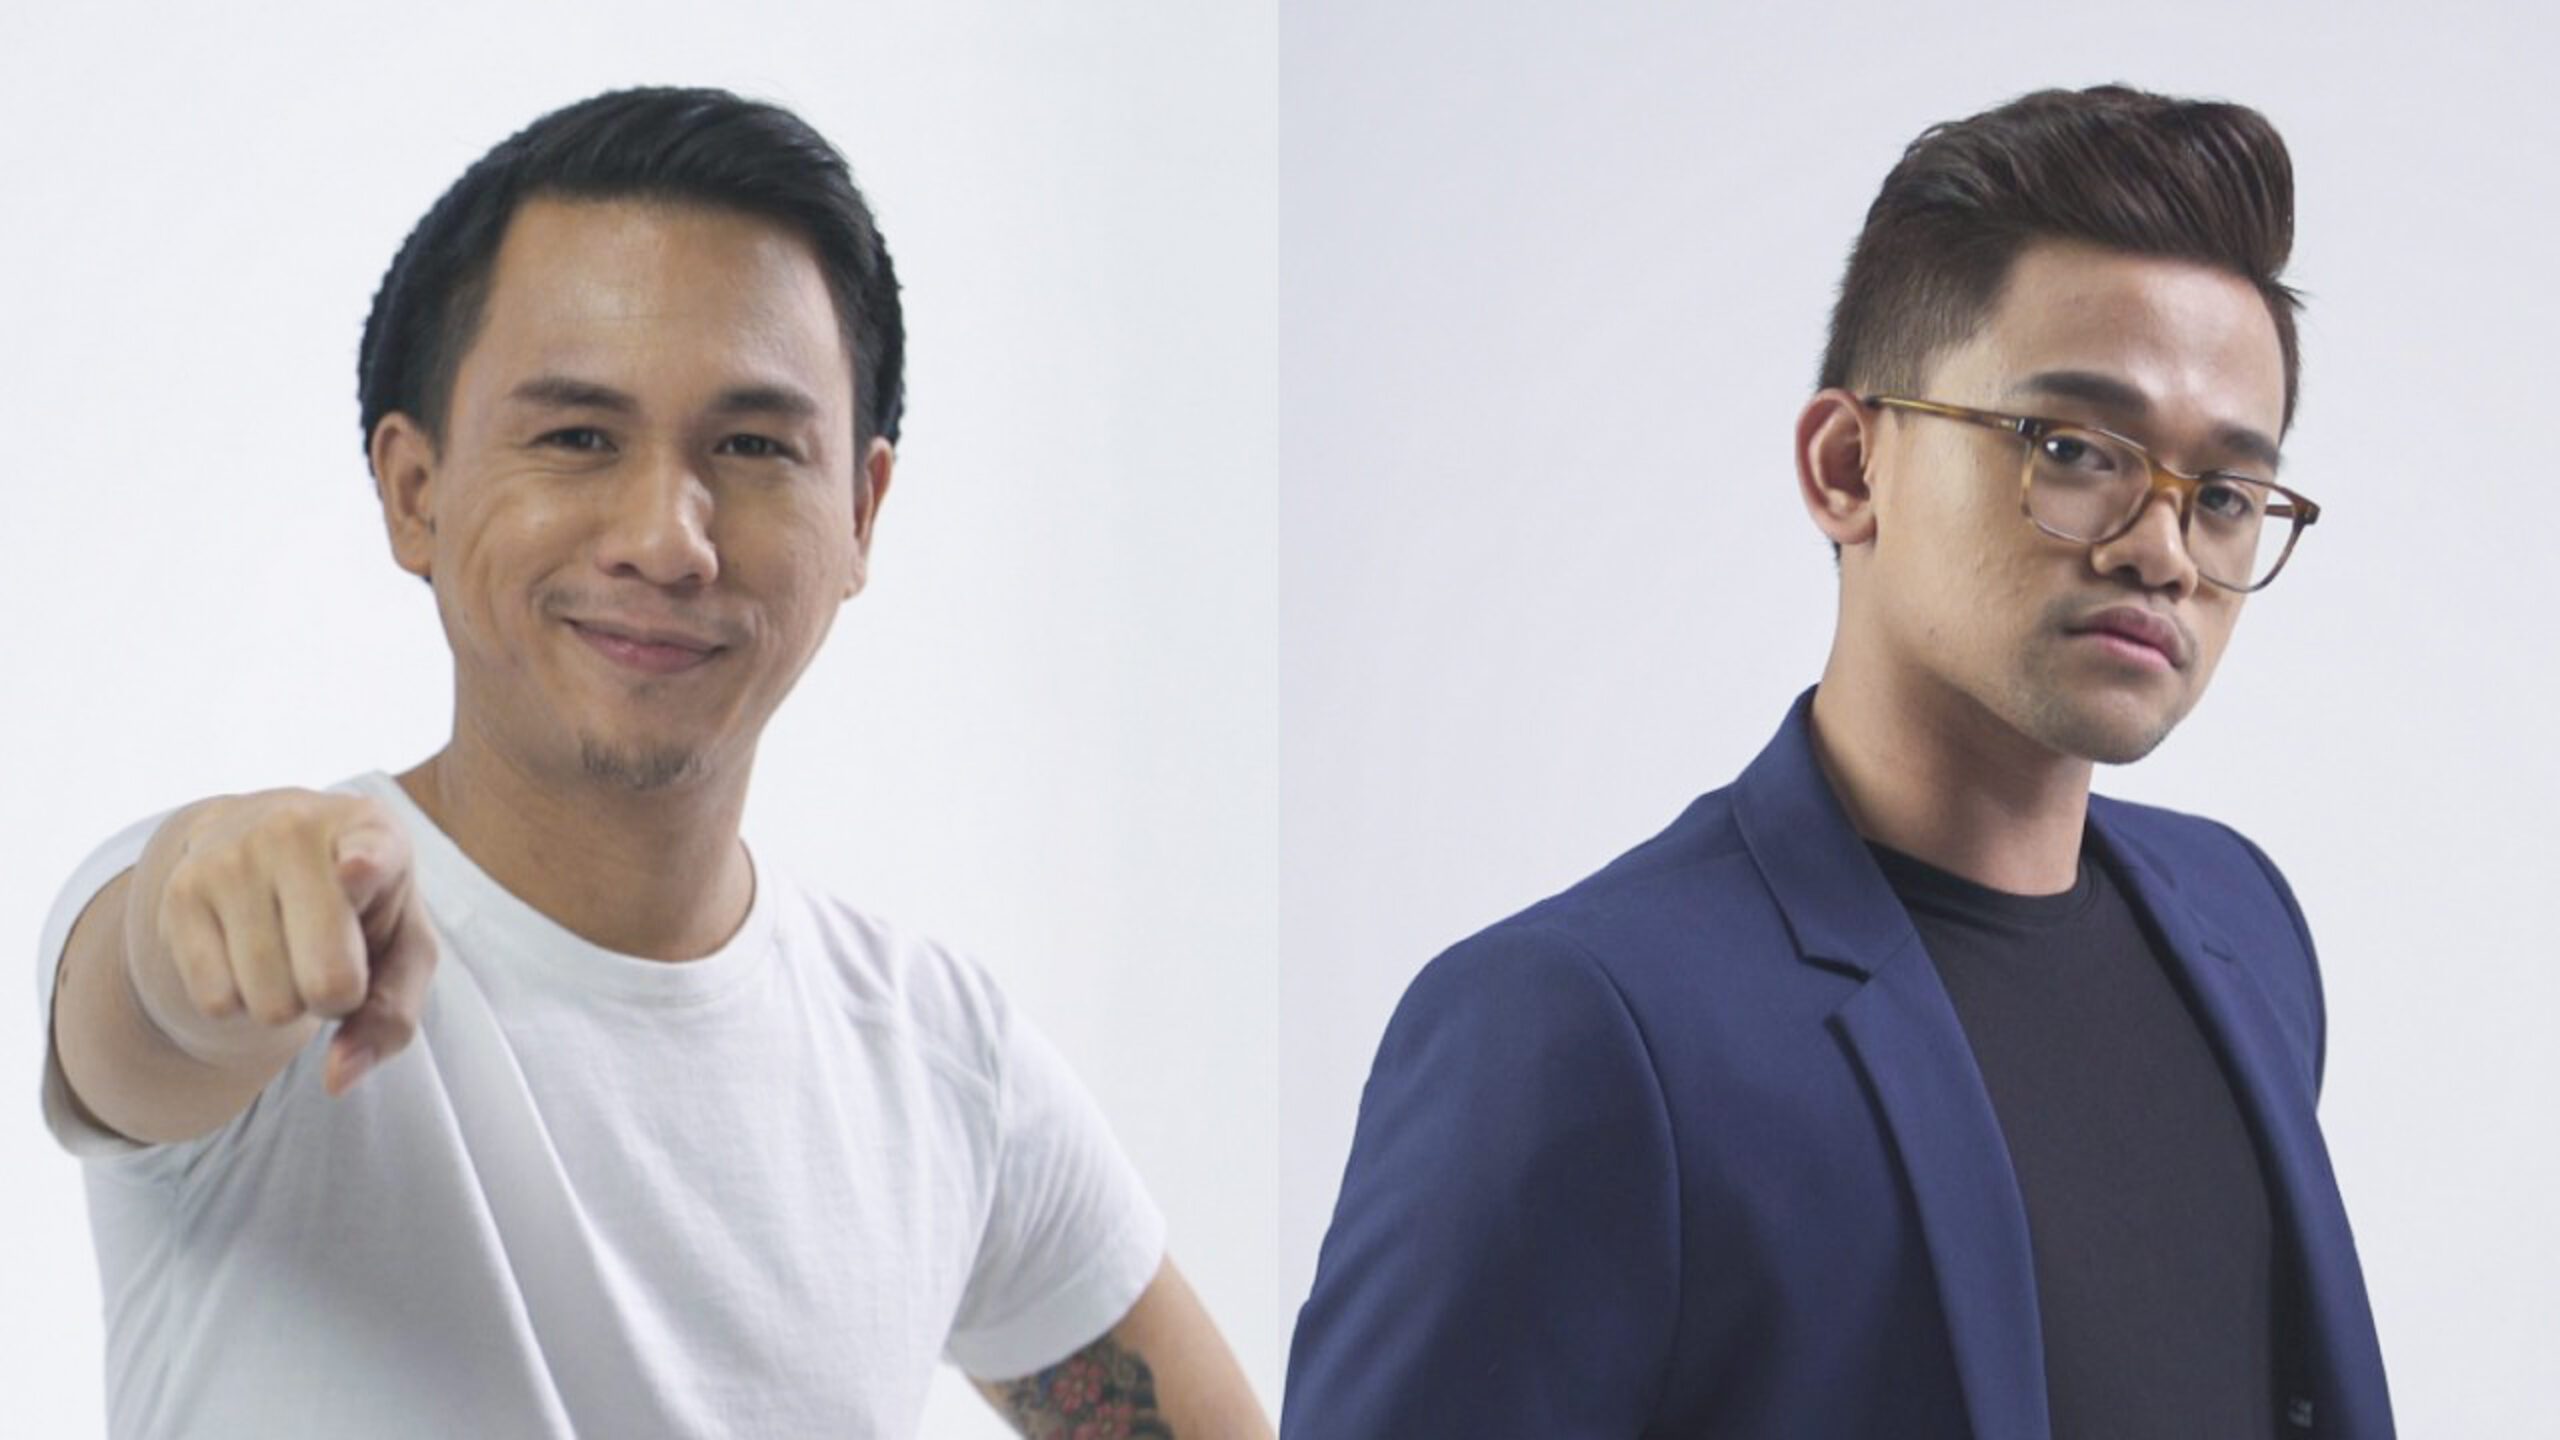 Meet the Filipino contestants on ‘Bolt of Talent’